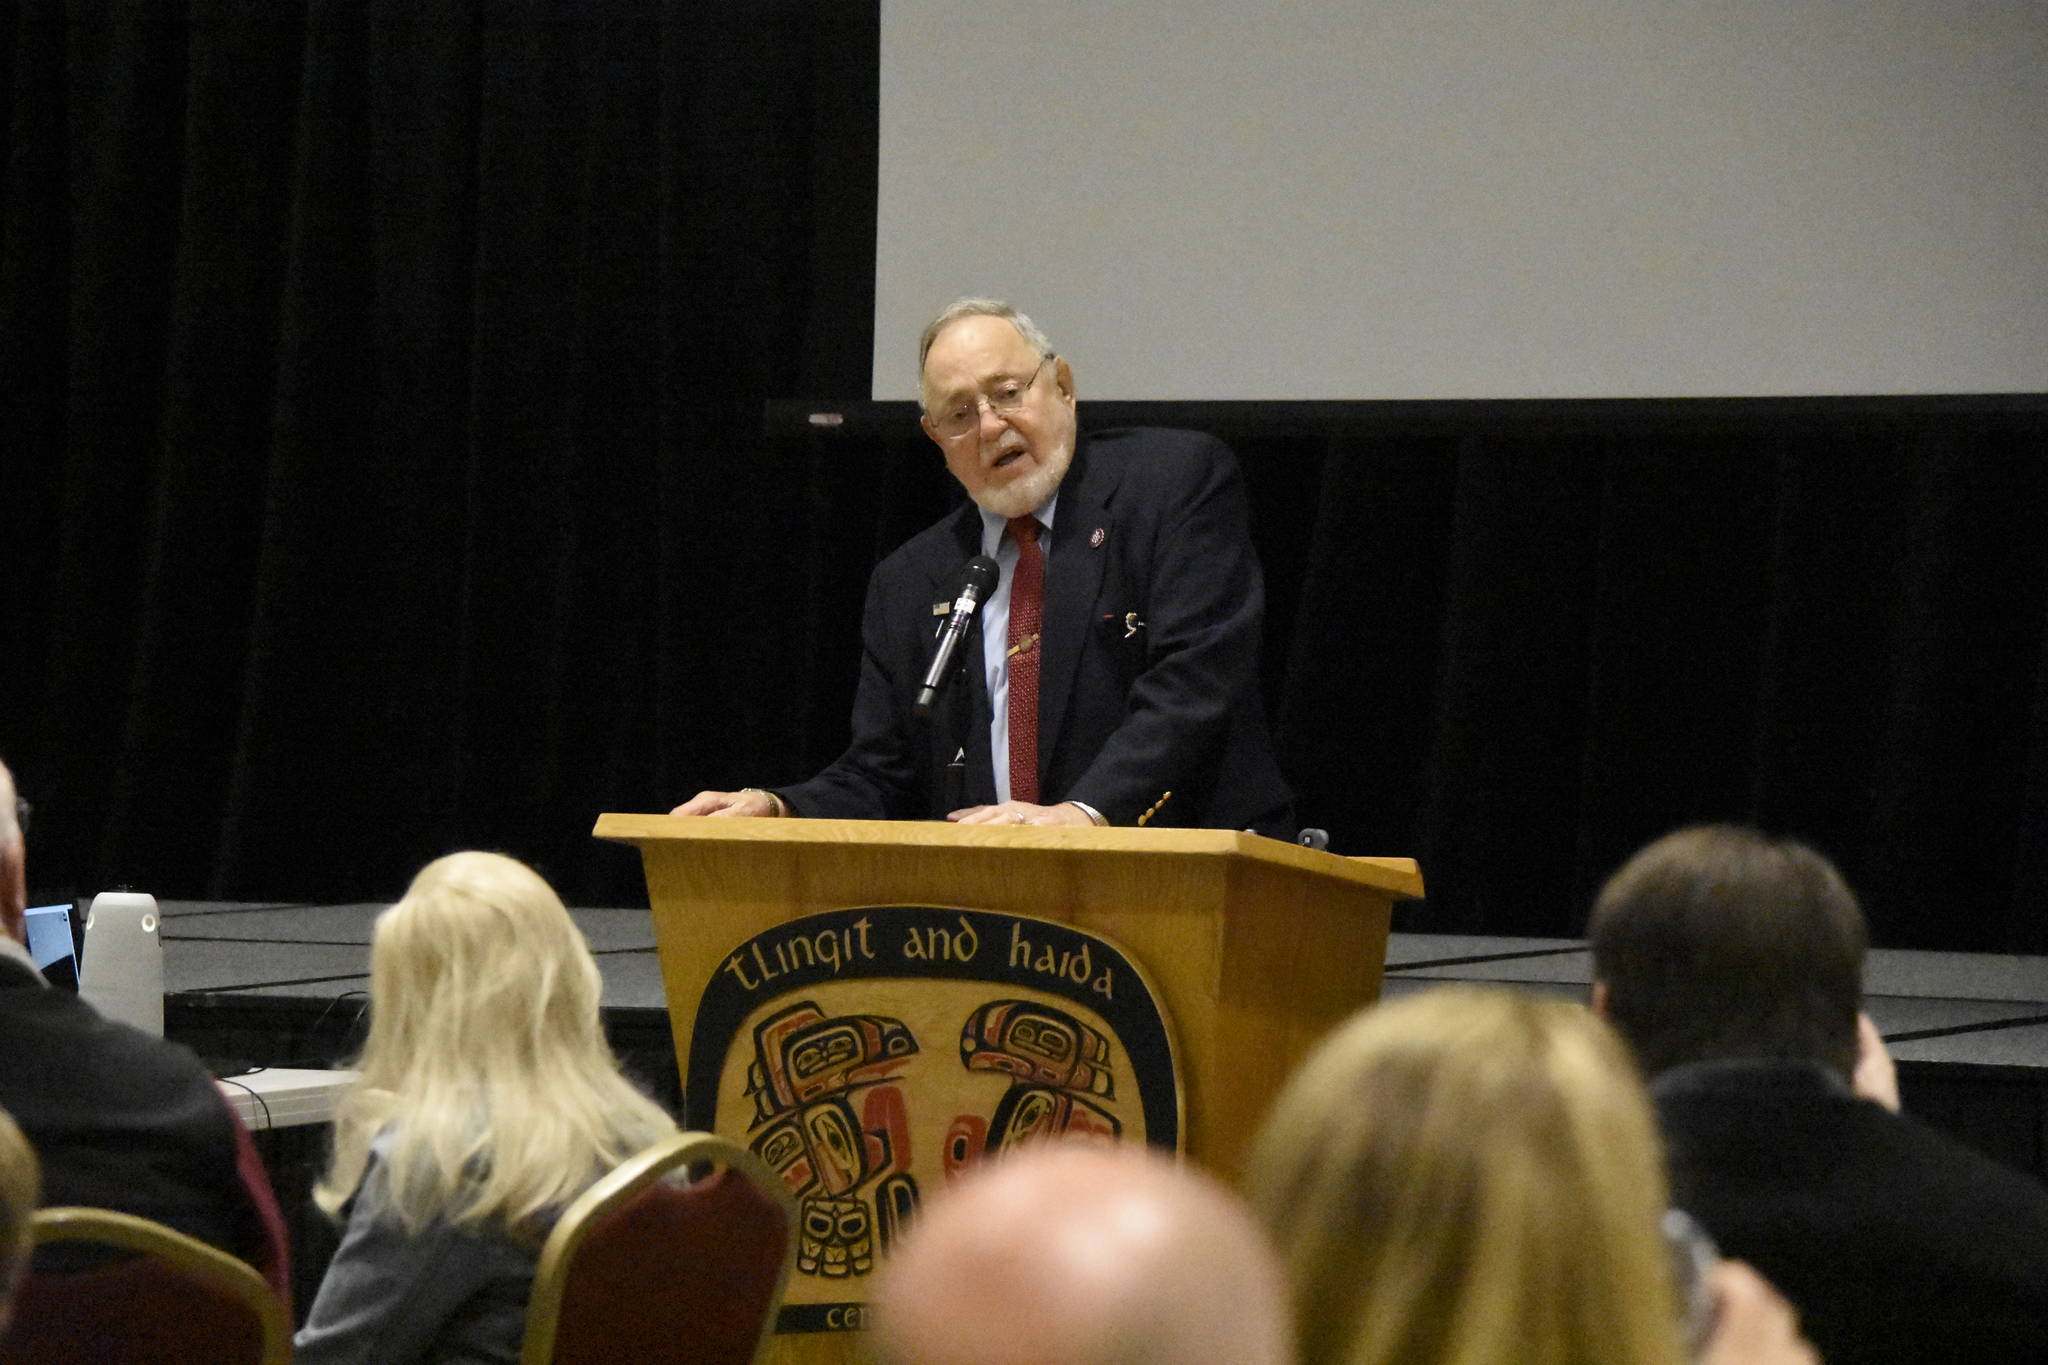 U.S. Rep. Don Young, R-Alaska, speaks to the first in-person meeting of the Greater Juneau Chamber of Commerce luncheon in over a year at Elizabeth Peratrovich Hall on Thursday, June 10, 2021. Young told the crowd he was working toward bipartisanship but expressed frustration with opposition to the resource industry. (Peter Segall / Juneau Empire)